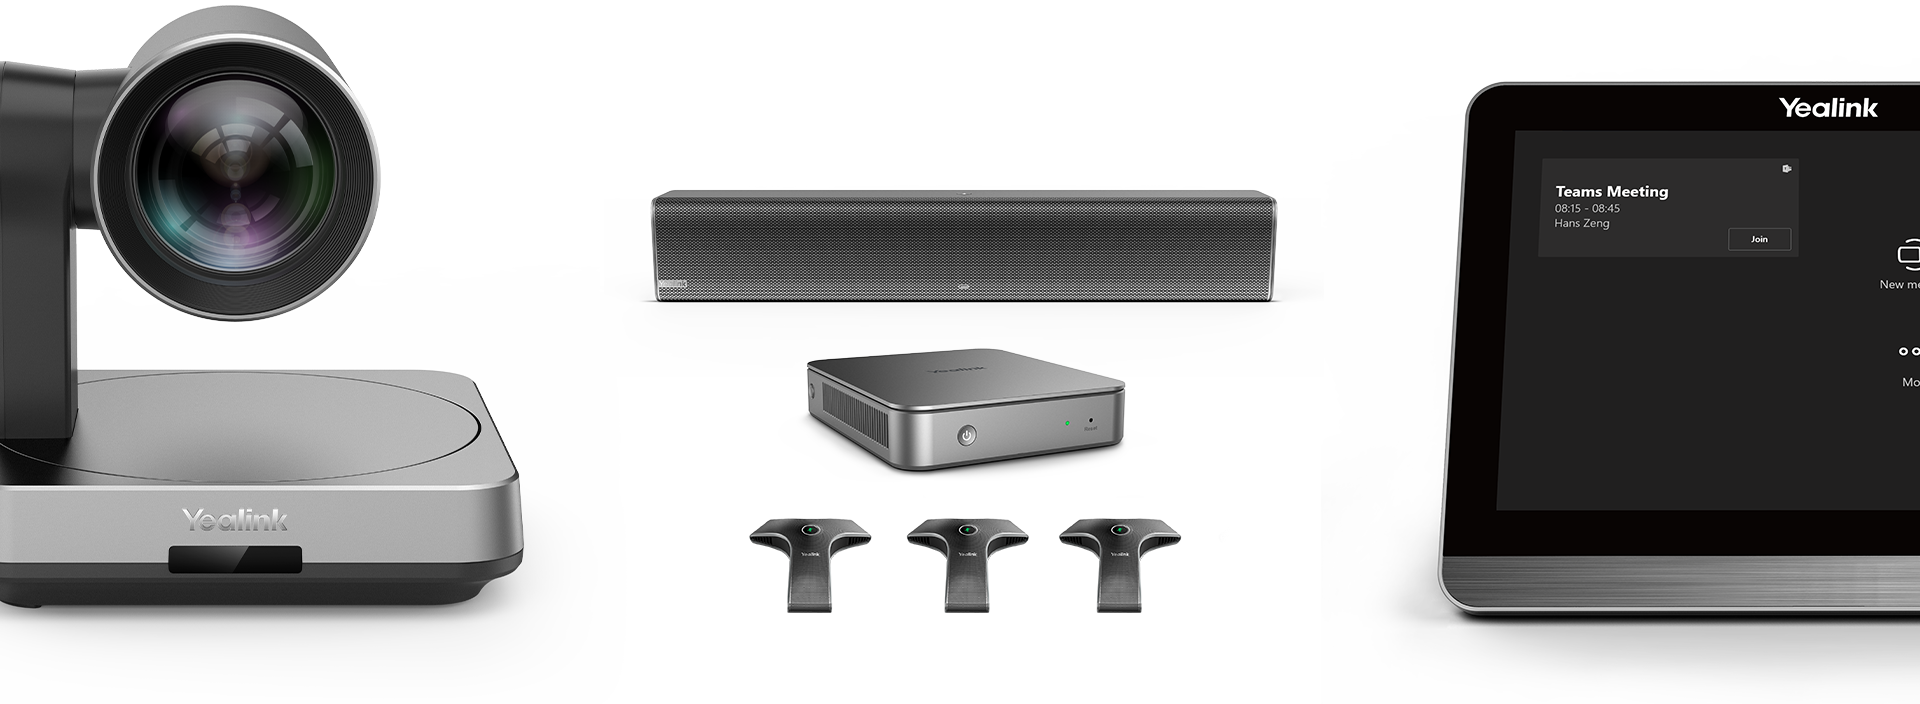 Microsoft Teams Video Conference Room Equipments